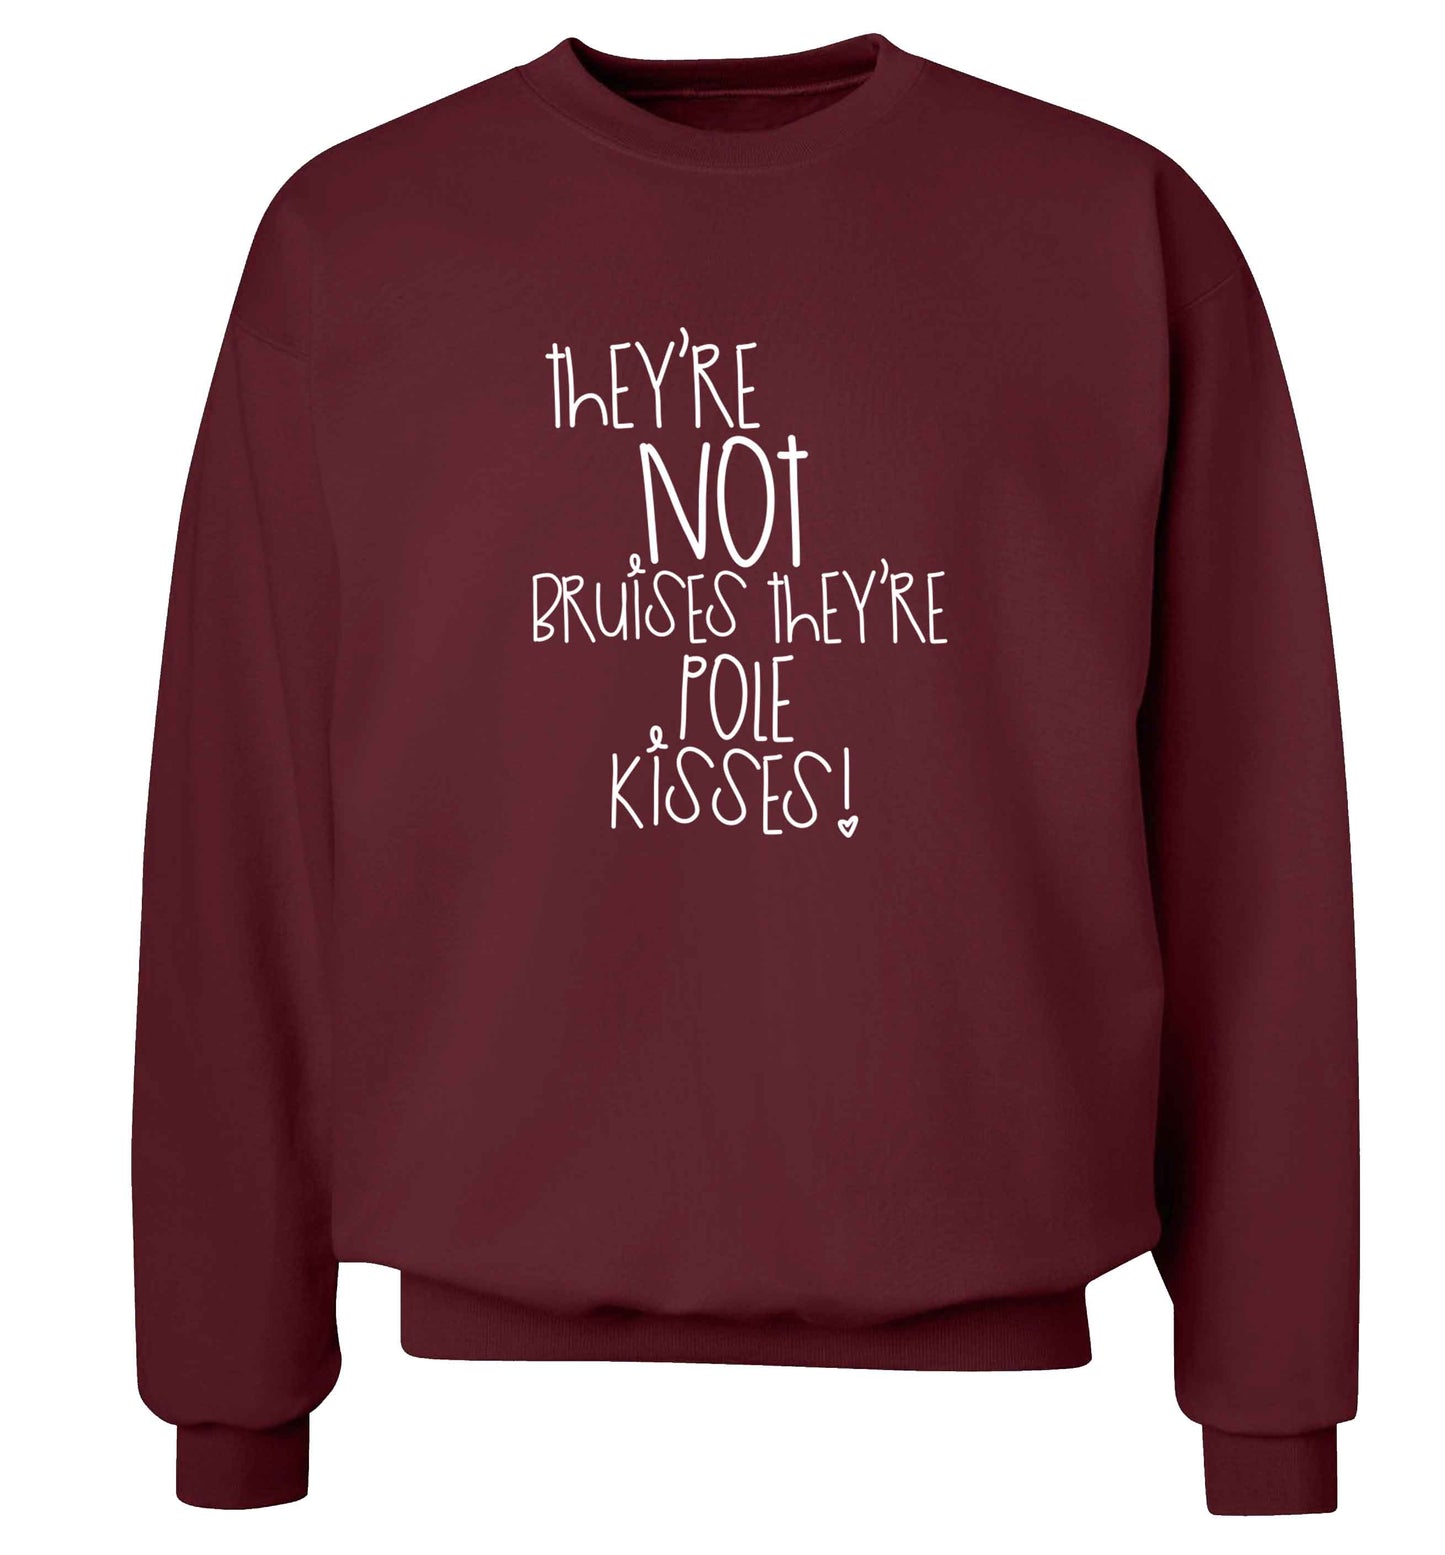 They're not bruises they're pole kisses adult's unisex maroon sweater 2XL